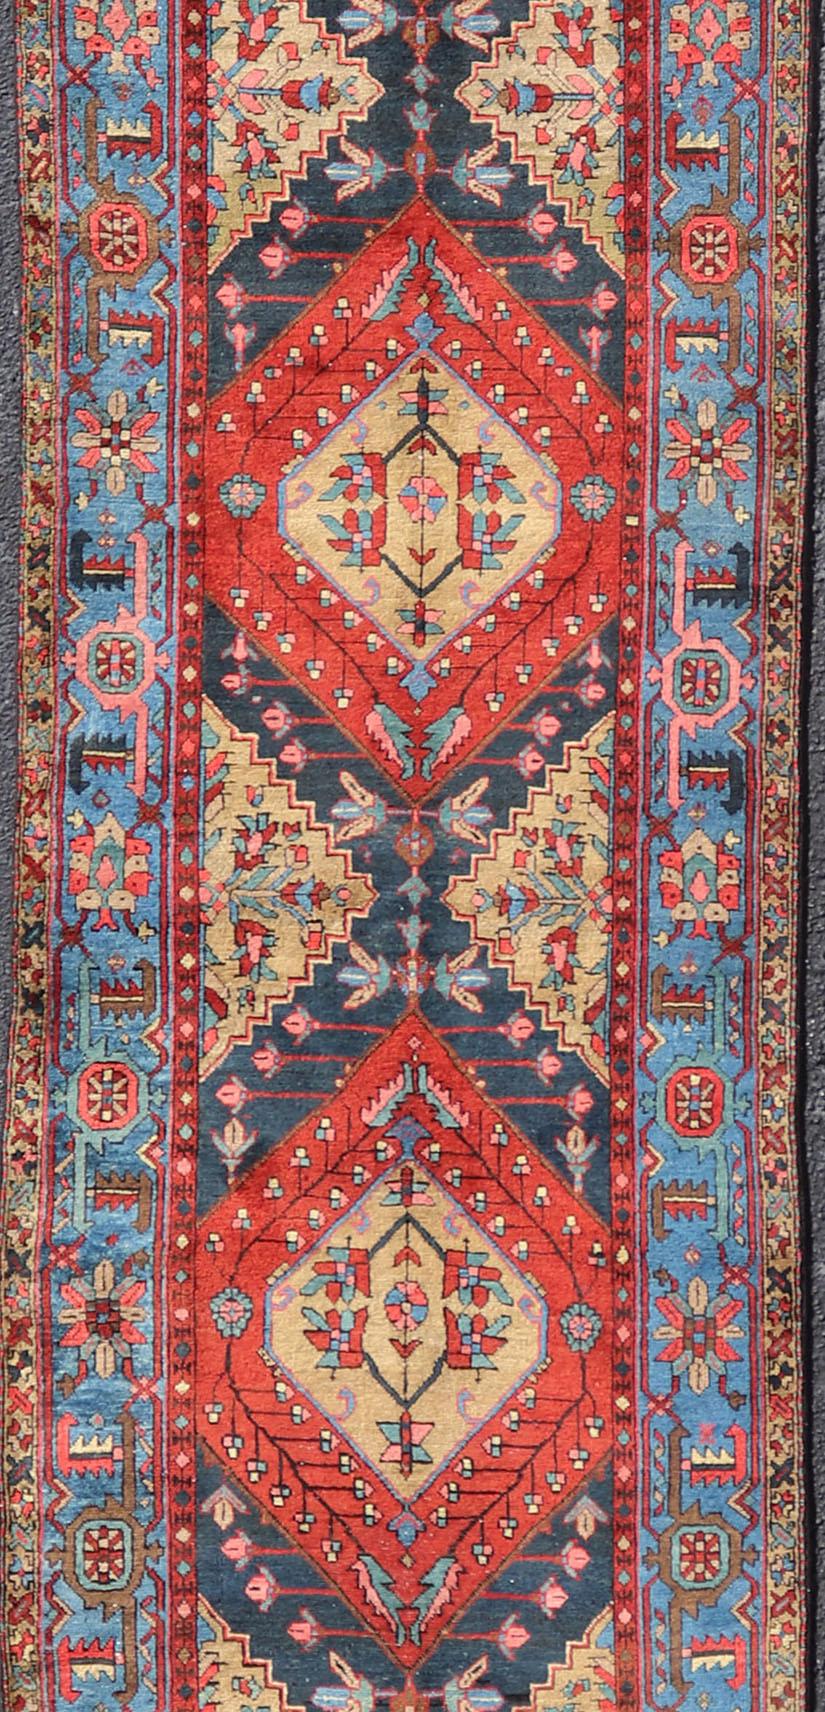 Antique Geometric Persian Long Heriz Runner in Red, Blue, Yellow, and Tan In Good Condition For Sale In Atlanta, GA